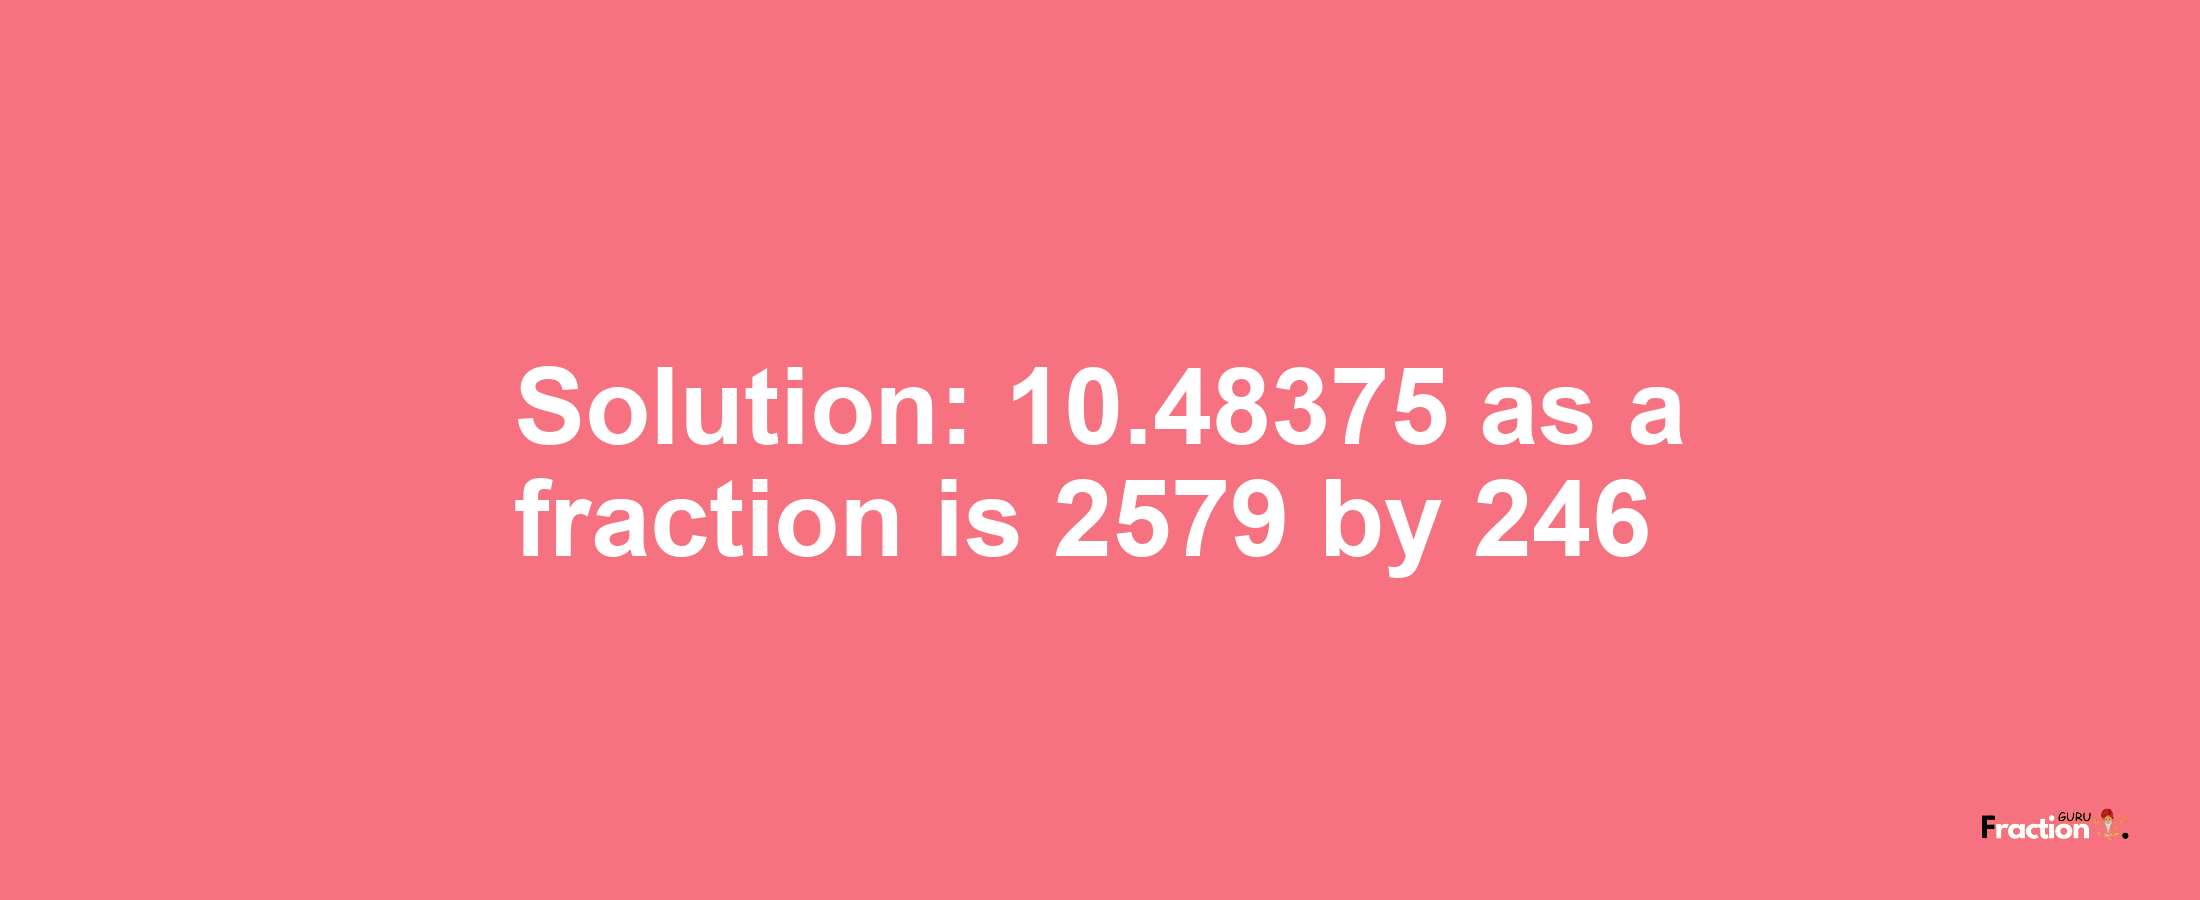 Solution:10.48375 as a fraction is 2579/246